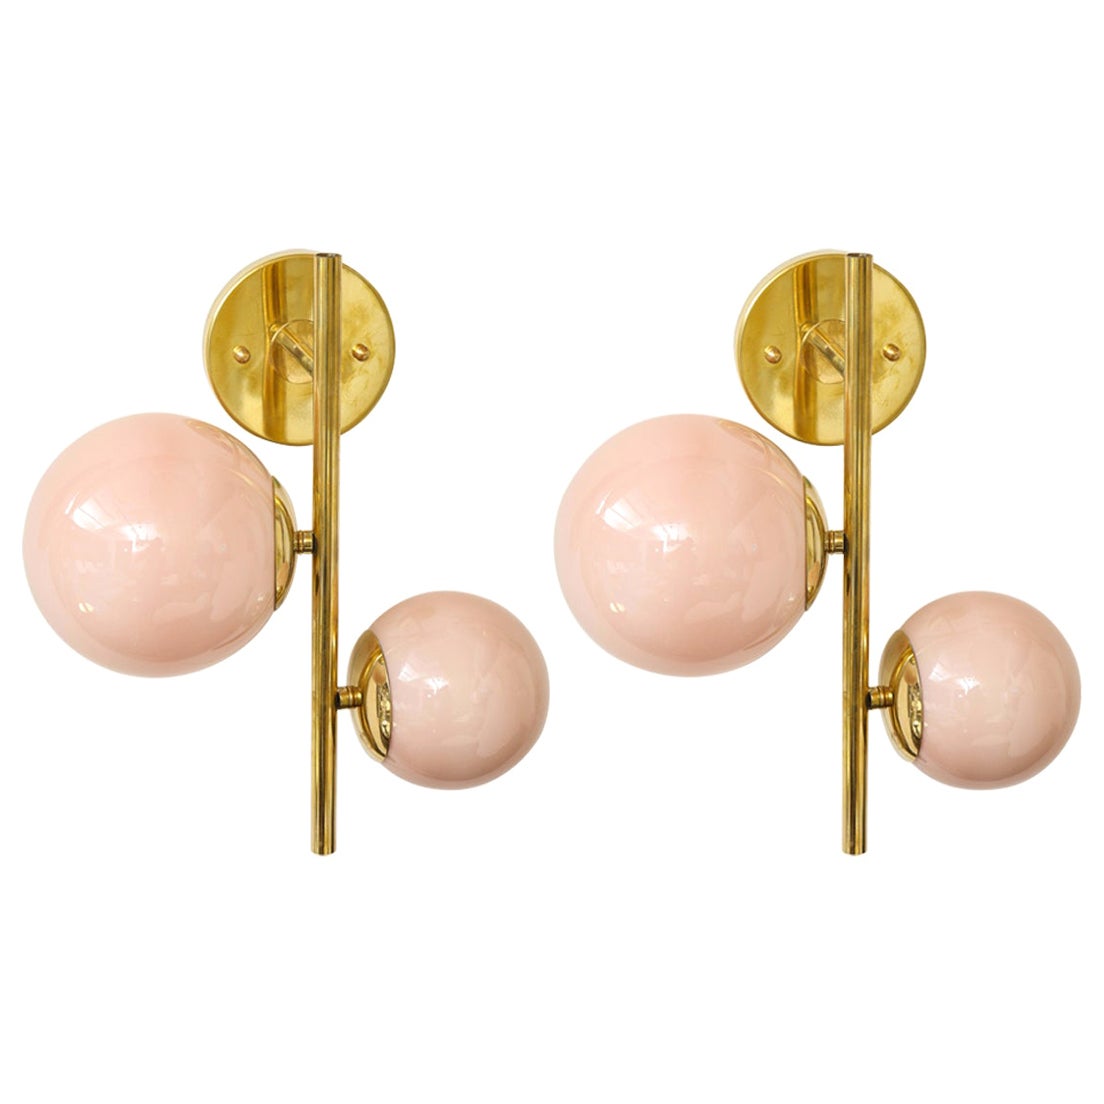 Pair of Blush Pink Murano Glass Globes and Brass Sconces, Italy, 2022